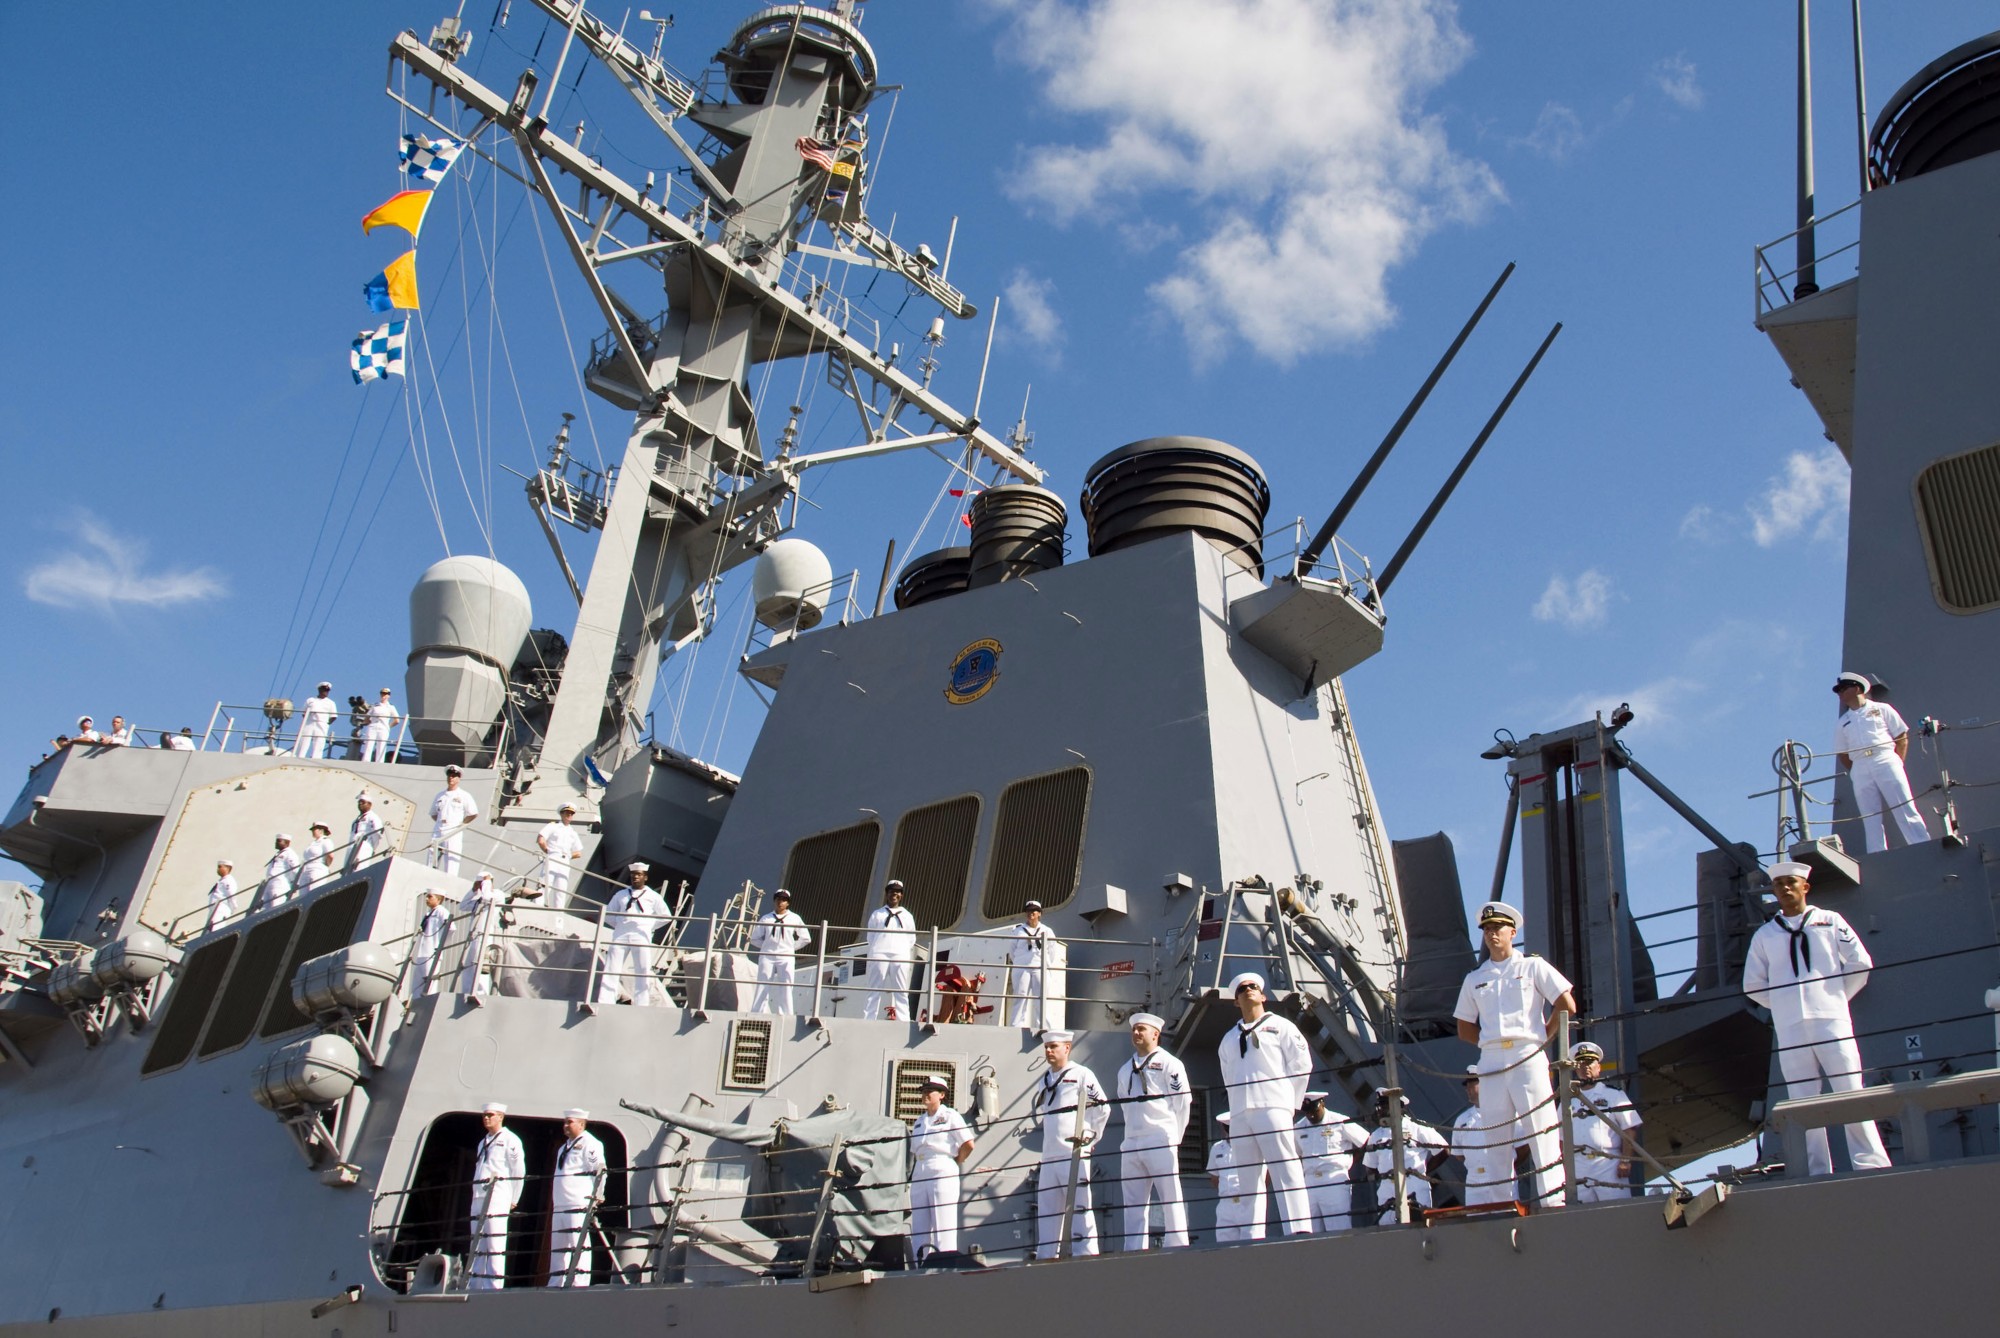 ddg-77 uss o'kane guided missile destroyer arleigh burke class navy aegis 37 naval station pearl harbor hawaii